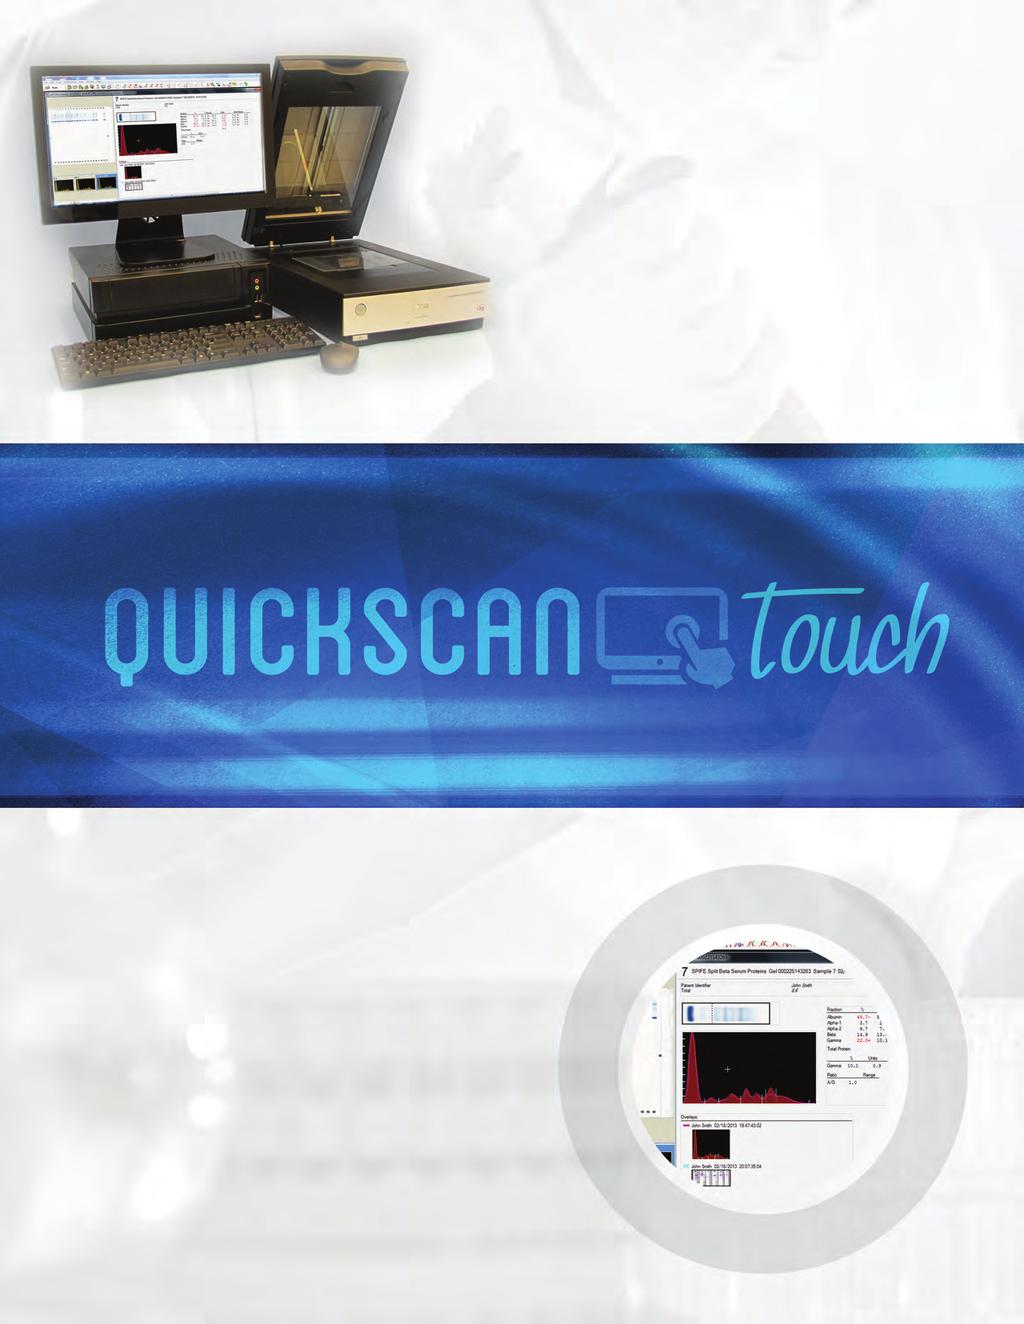 QuickScan Touch Touch the screen and automatically demarcate the M-spike. Swipe the slider and reverse the pattern image for easier analysis.